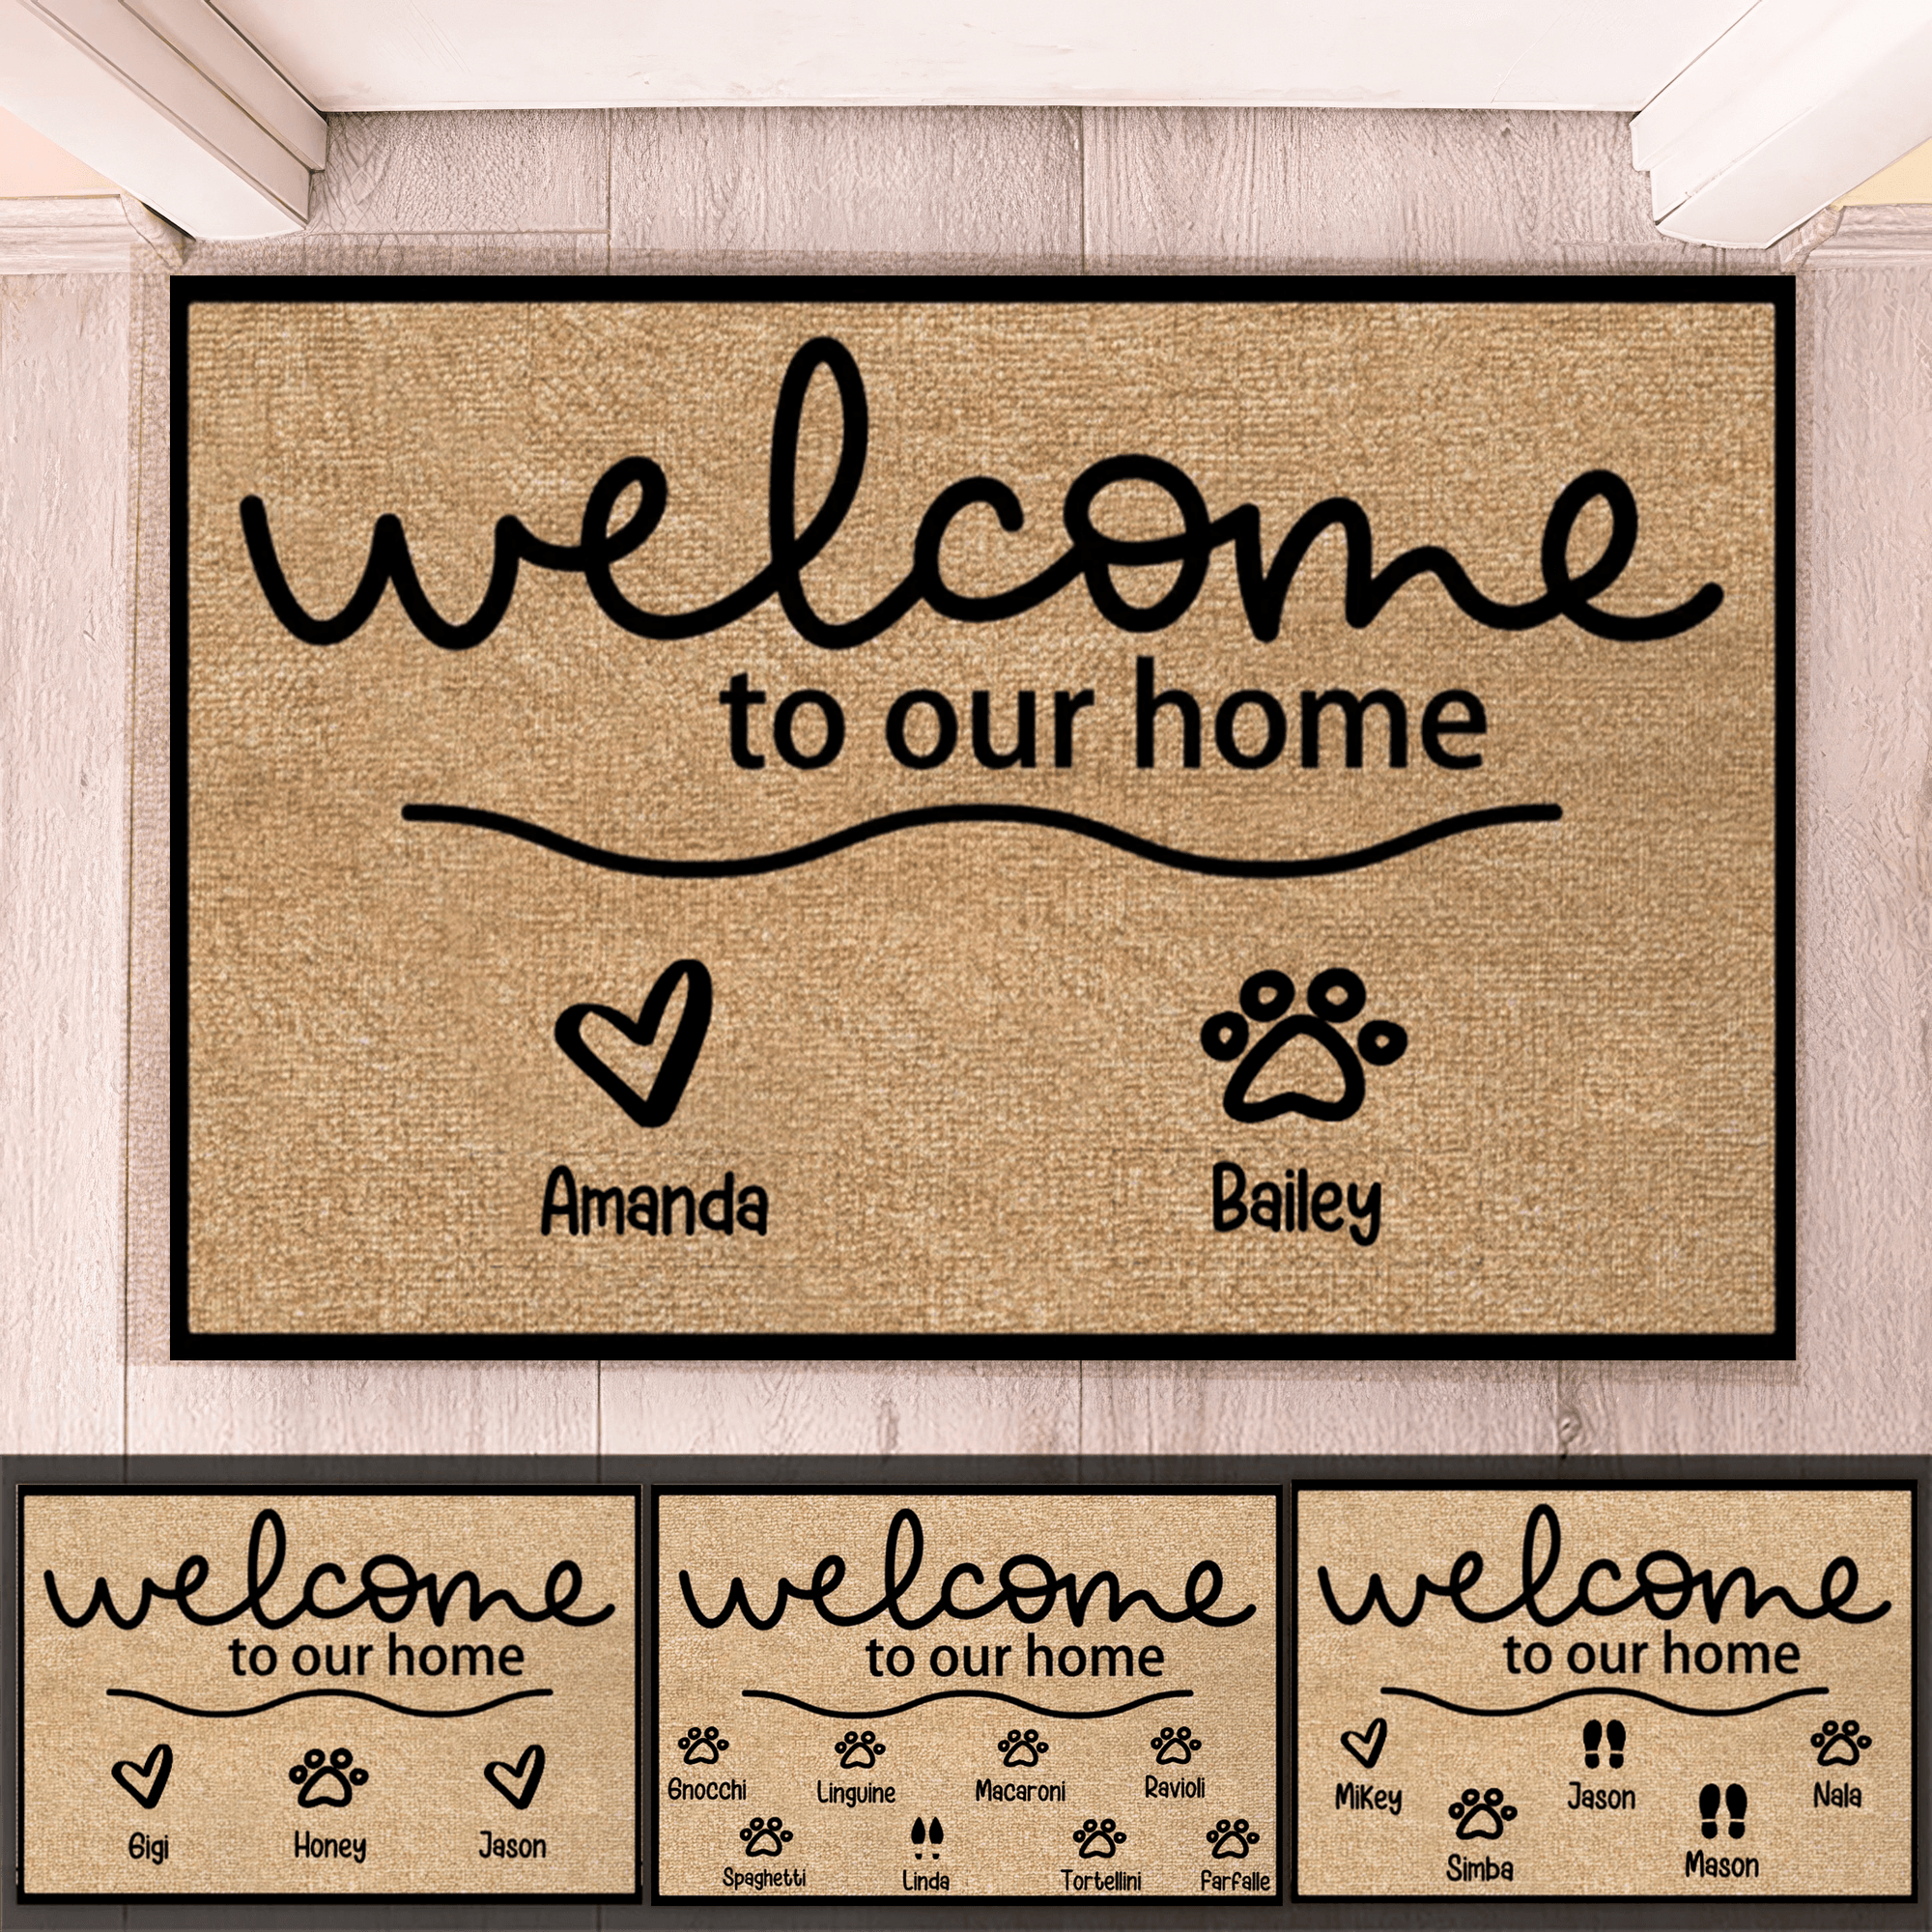 Paw Prints - Welcome To Our Home - Personalized Doormat - Birthday, Housewarming, Funny Gift for Homeowners, Friends, Dog Mom, Dog Dad, Dog Lovers, Pet Gifts for Him, Her - Suzitee Store